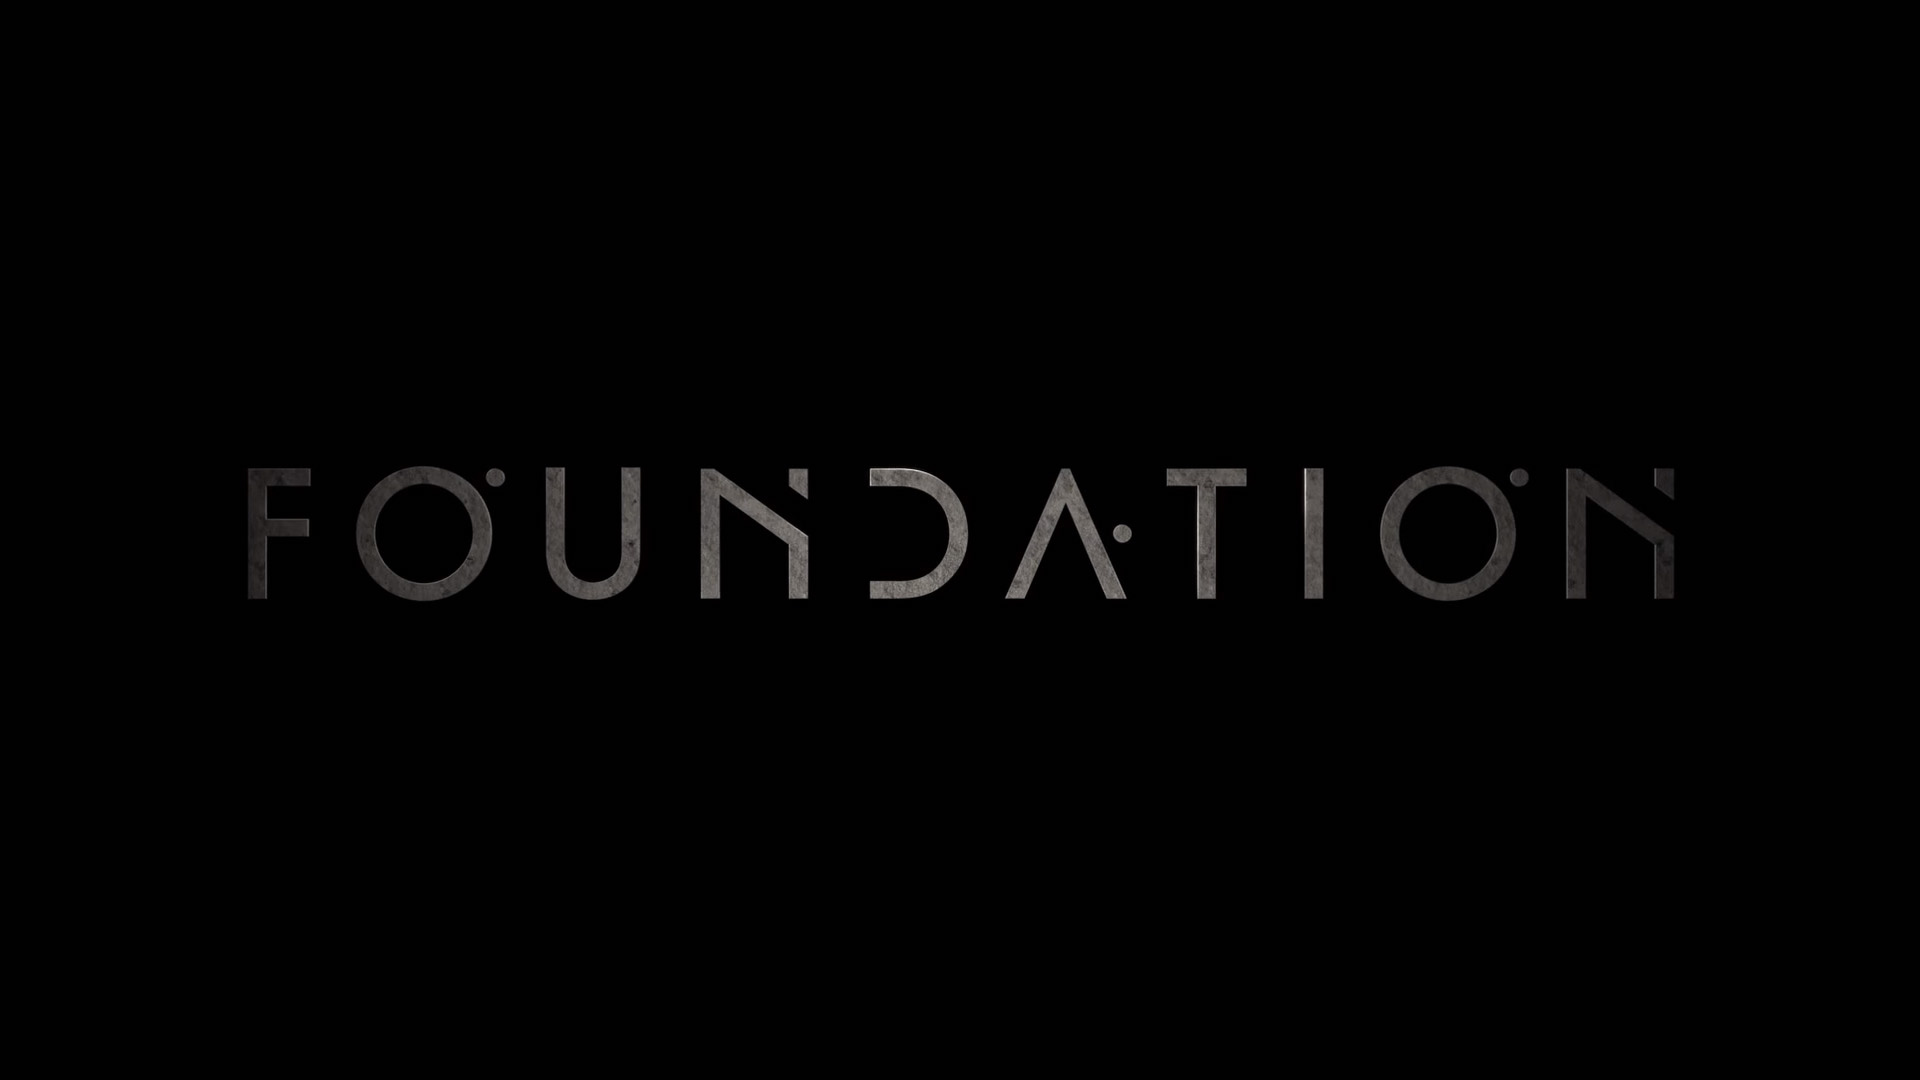 Foundation (TV Series): The epic science-fiction drama, Features an ensemble cast led by Jared Harris, Lee Pace, Lou Llobell and Leah Harvey. 1920x1080 Full HD Background.